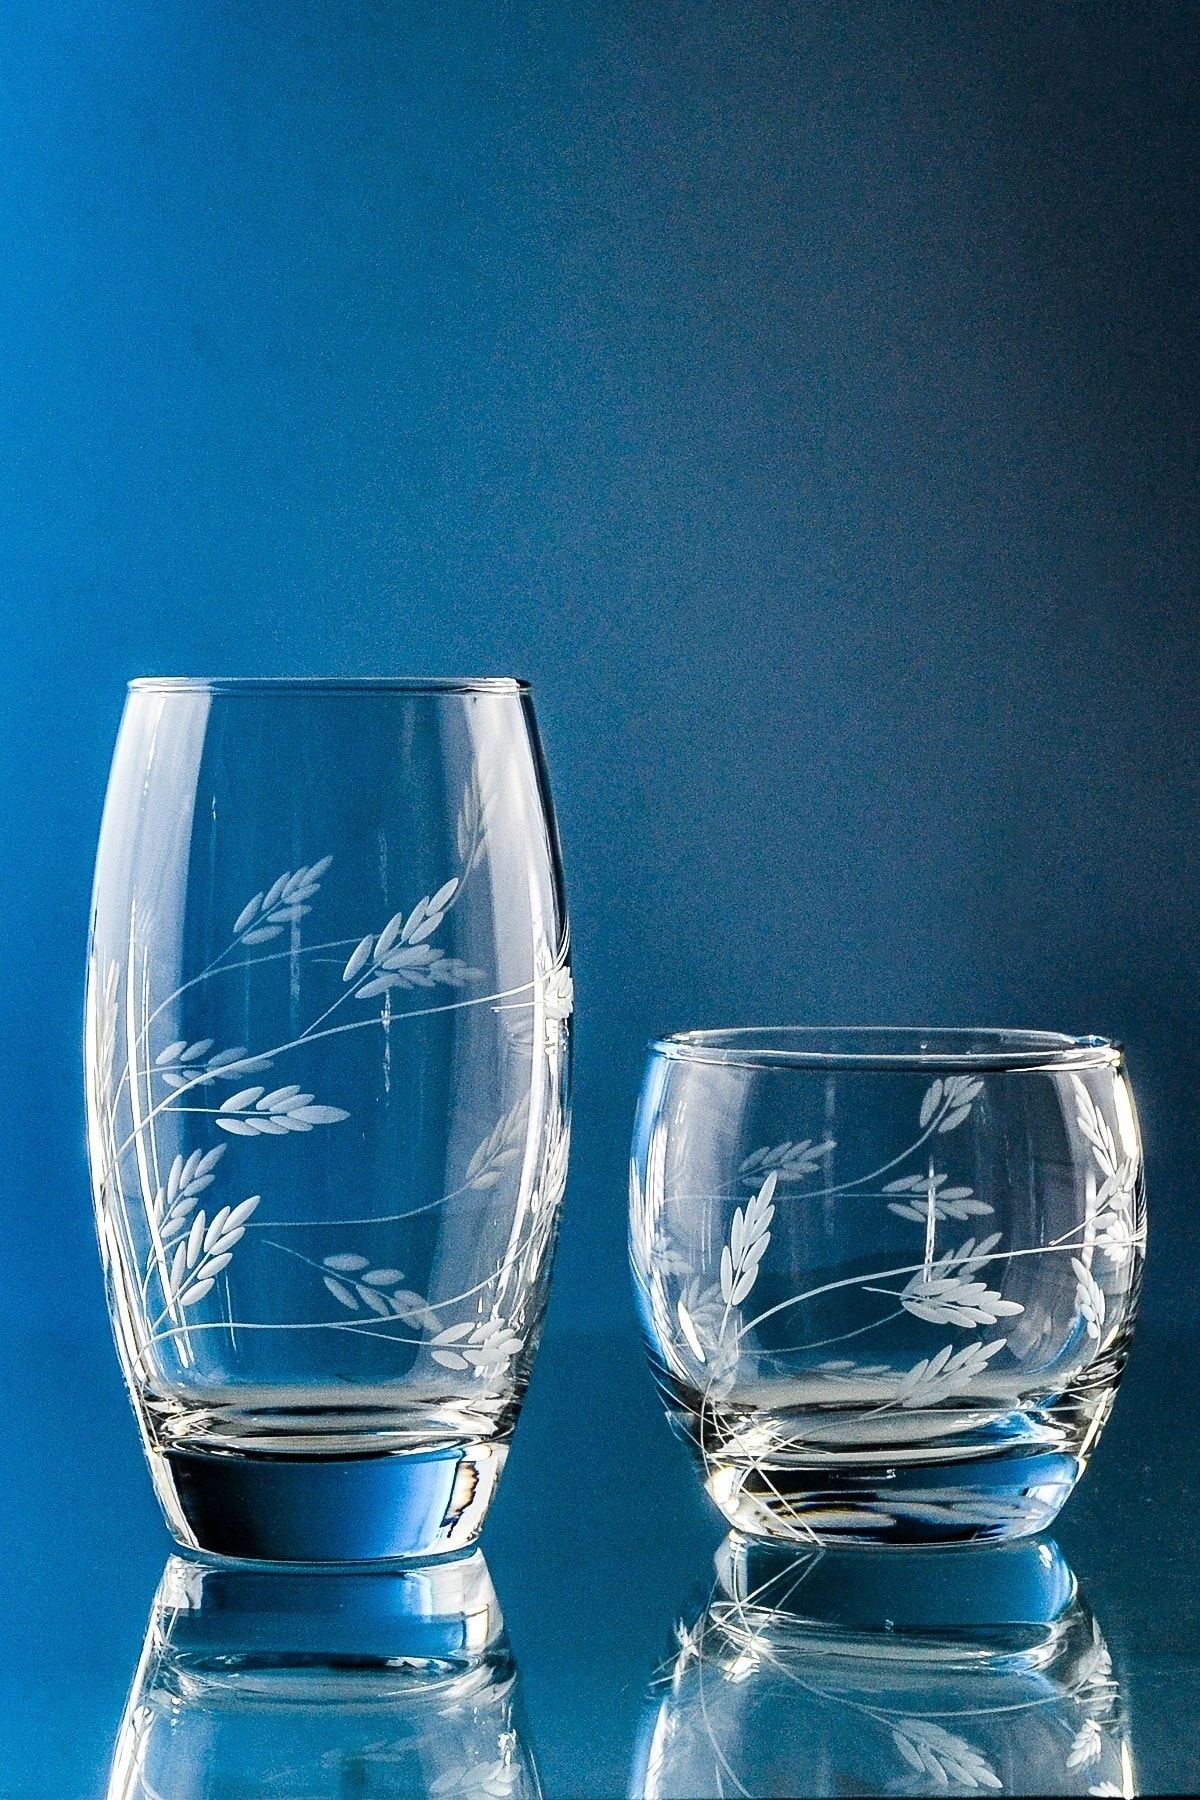 Crystal and glass engraving